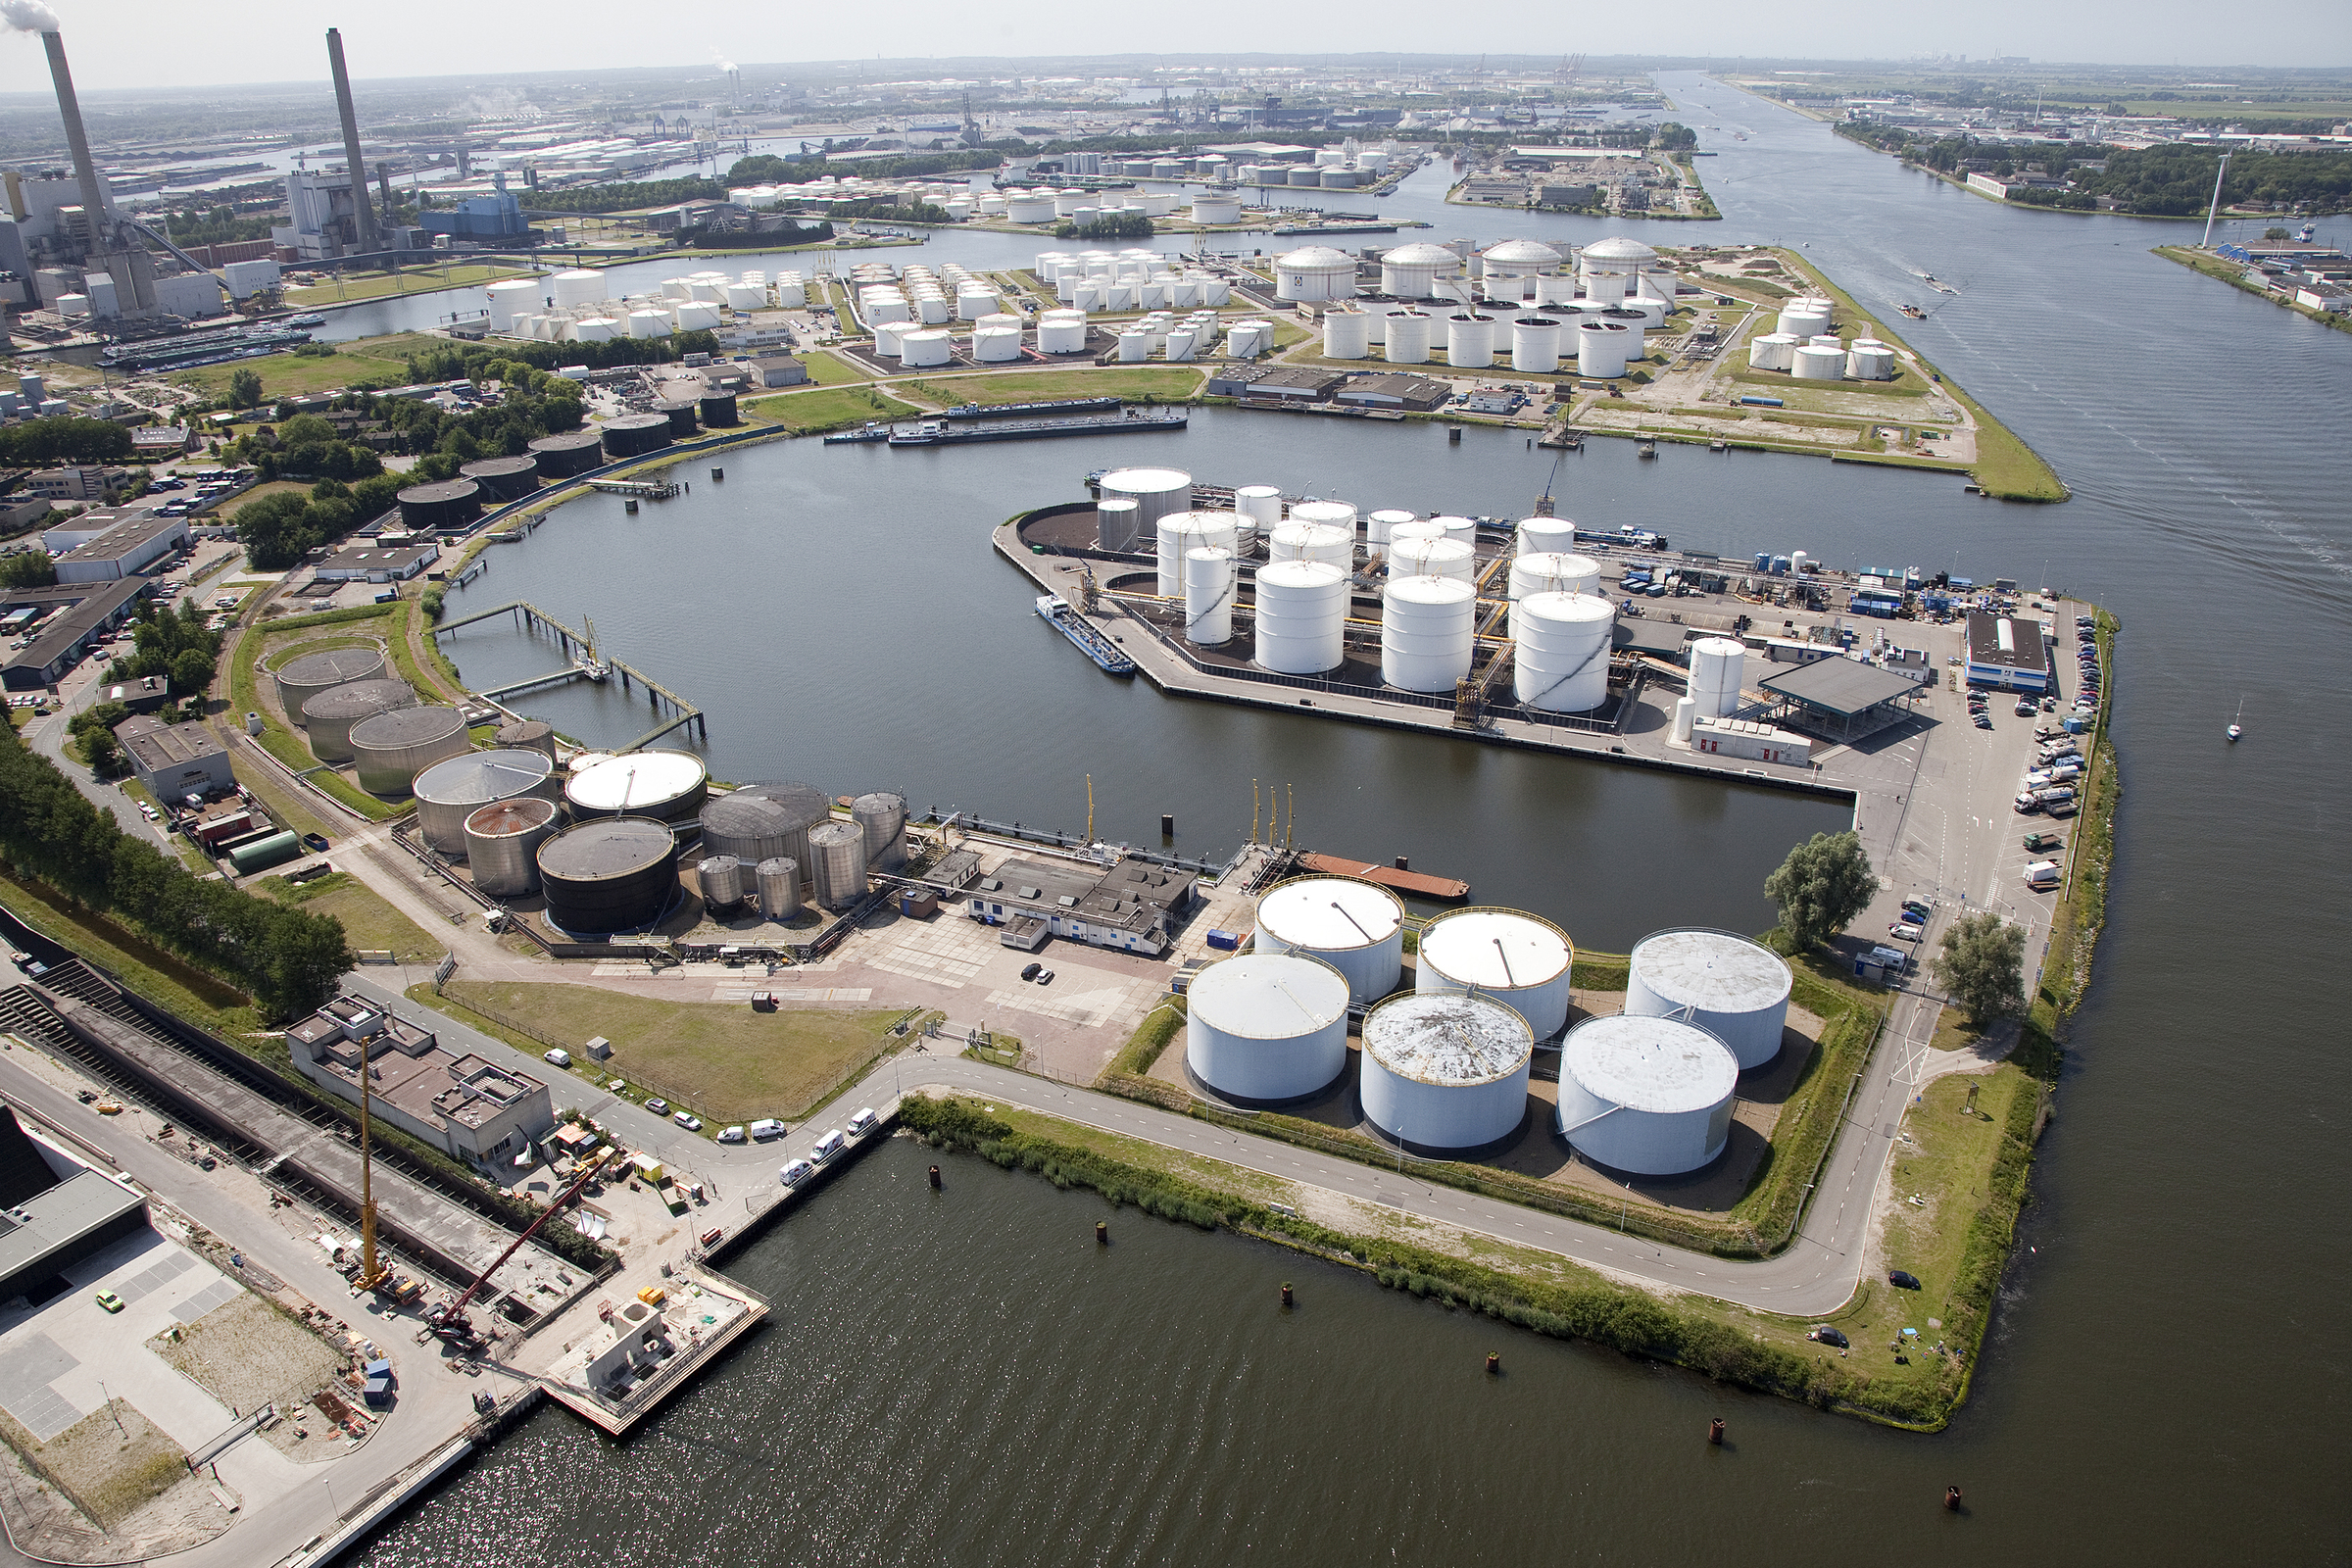 NZKG aerial view: with the Petrol dock in the foreground